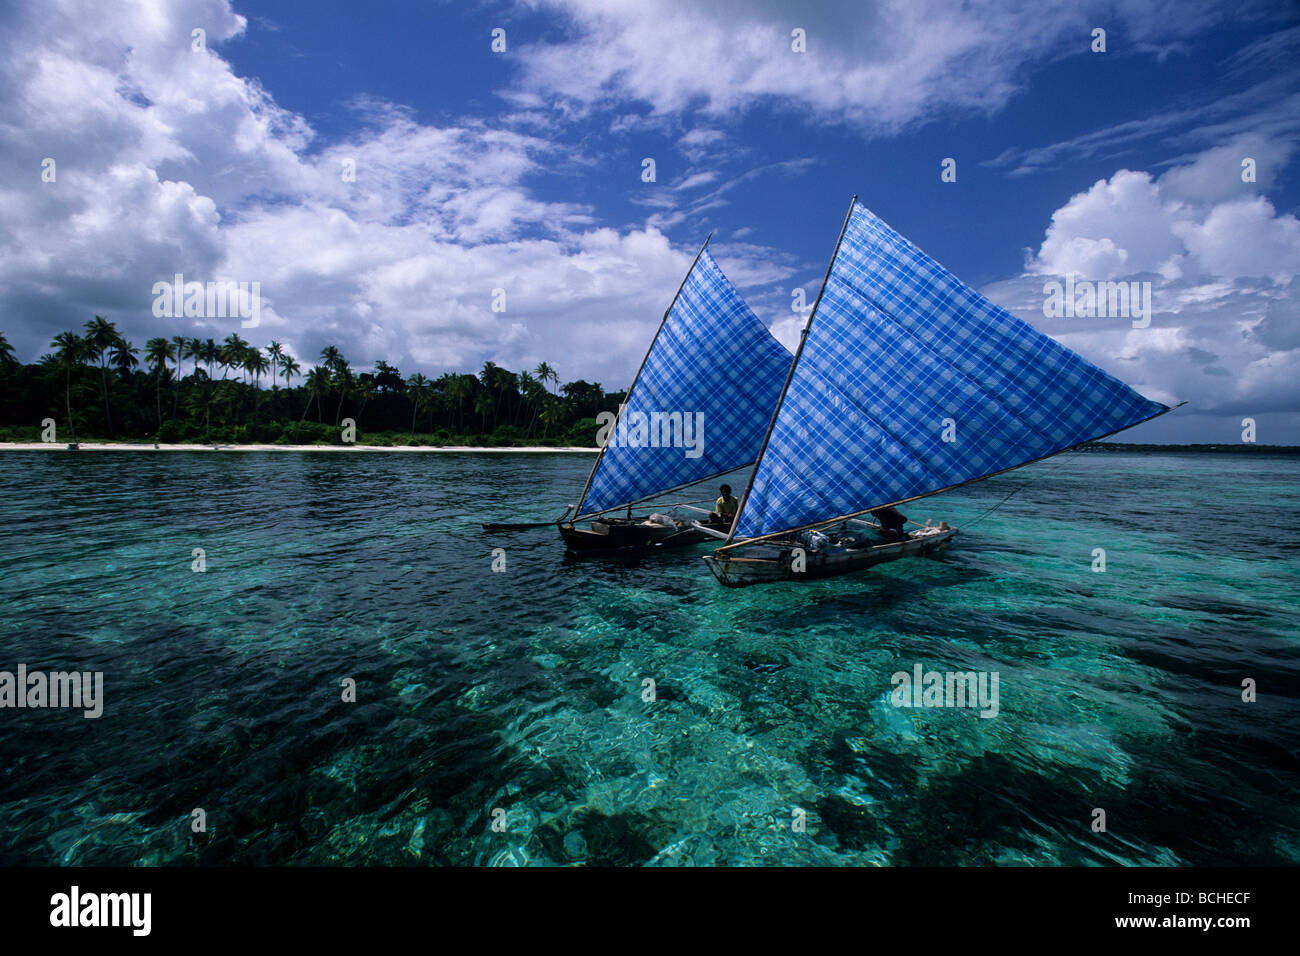 Fisherman with traditional Outrigger Boats Wakatobi Celebes Indo Pacific Indonesia Stock Photo